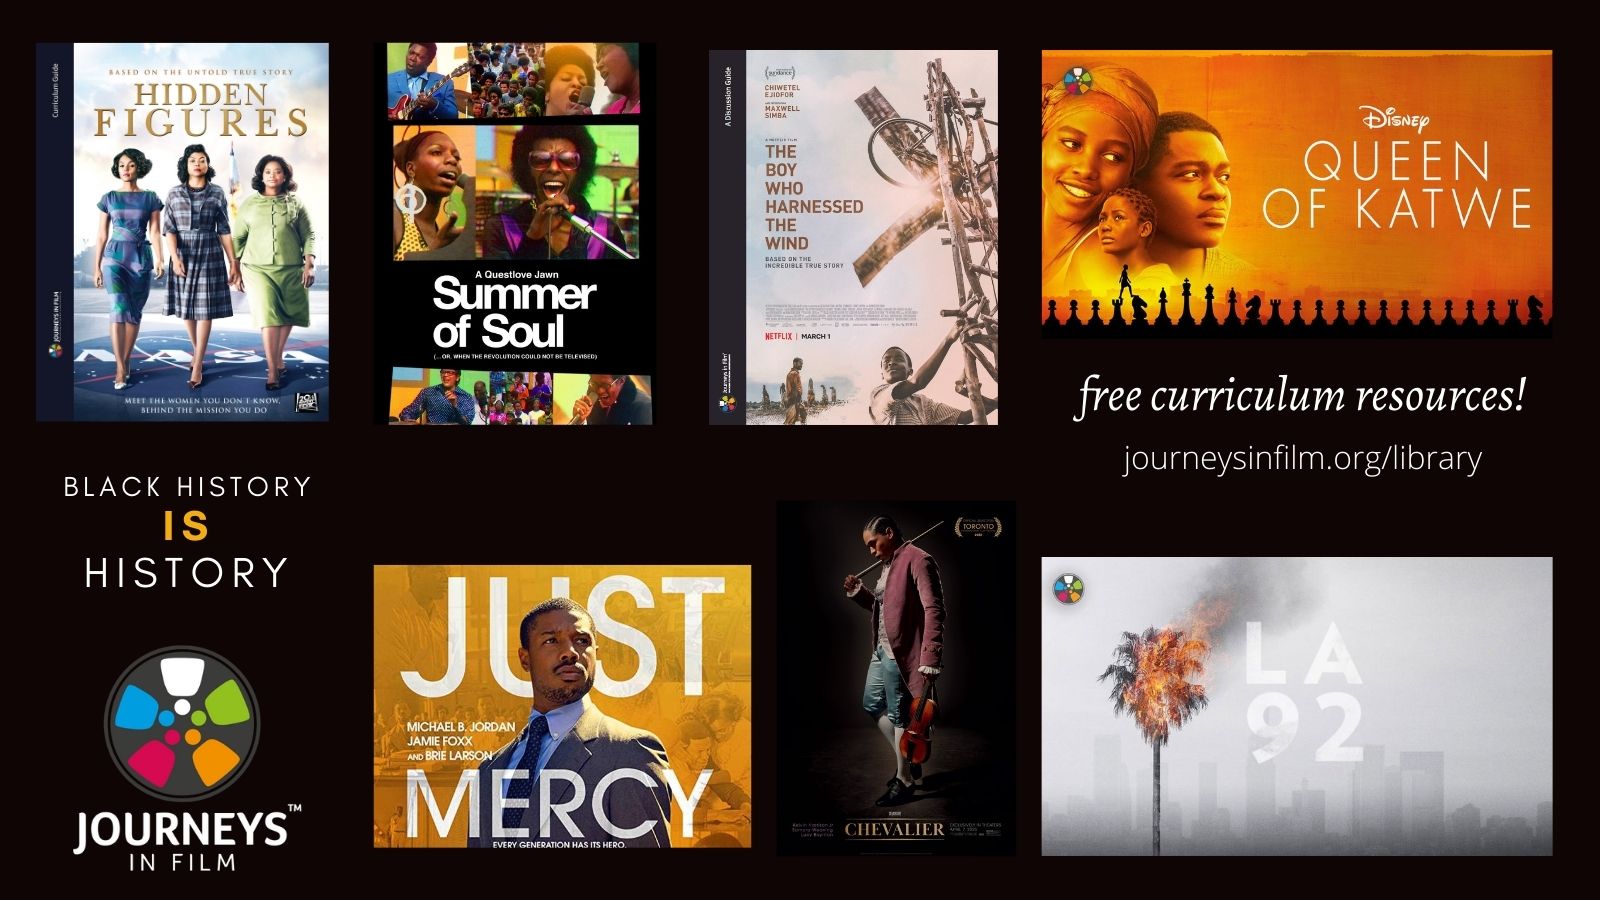 Collage of film posters for Hidden Figures, Summer of Soul, The Boy Who Harnessed The Wind, Queen of Katwe, Just Mercy, Chevalier, and LA 92. Text on the left says: "Black History IS History."